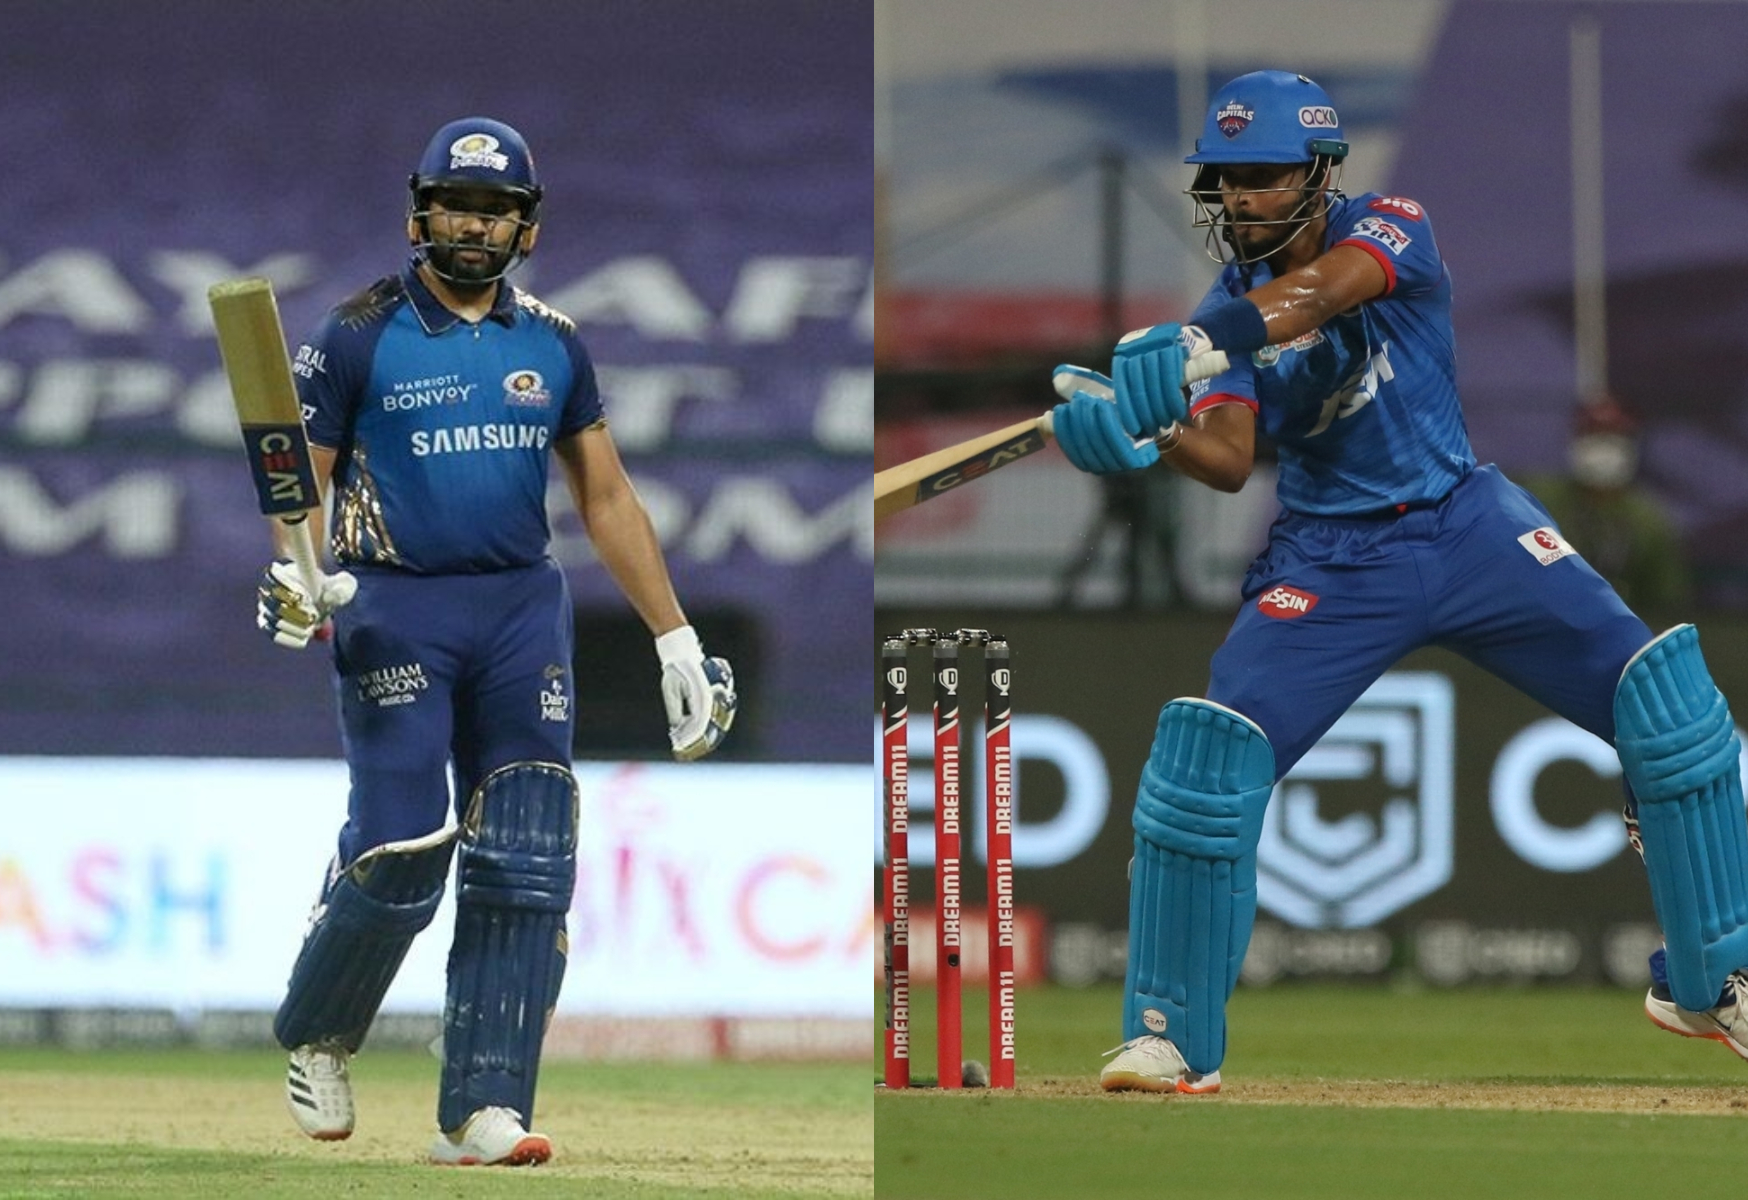 Rohit's MI goes against Iyer's DC in a battle of table-toppers